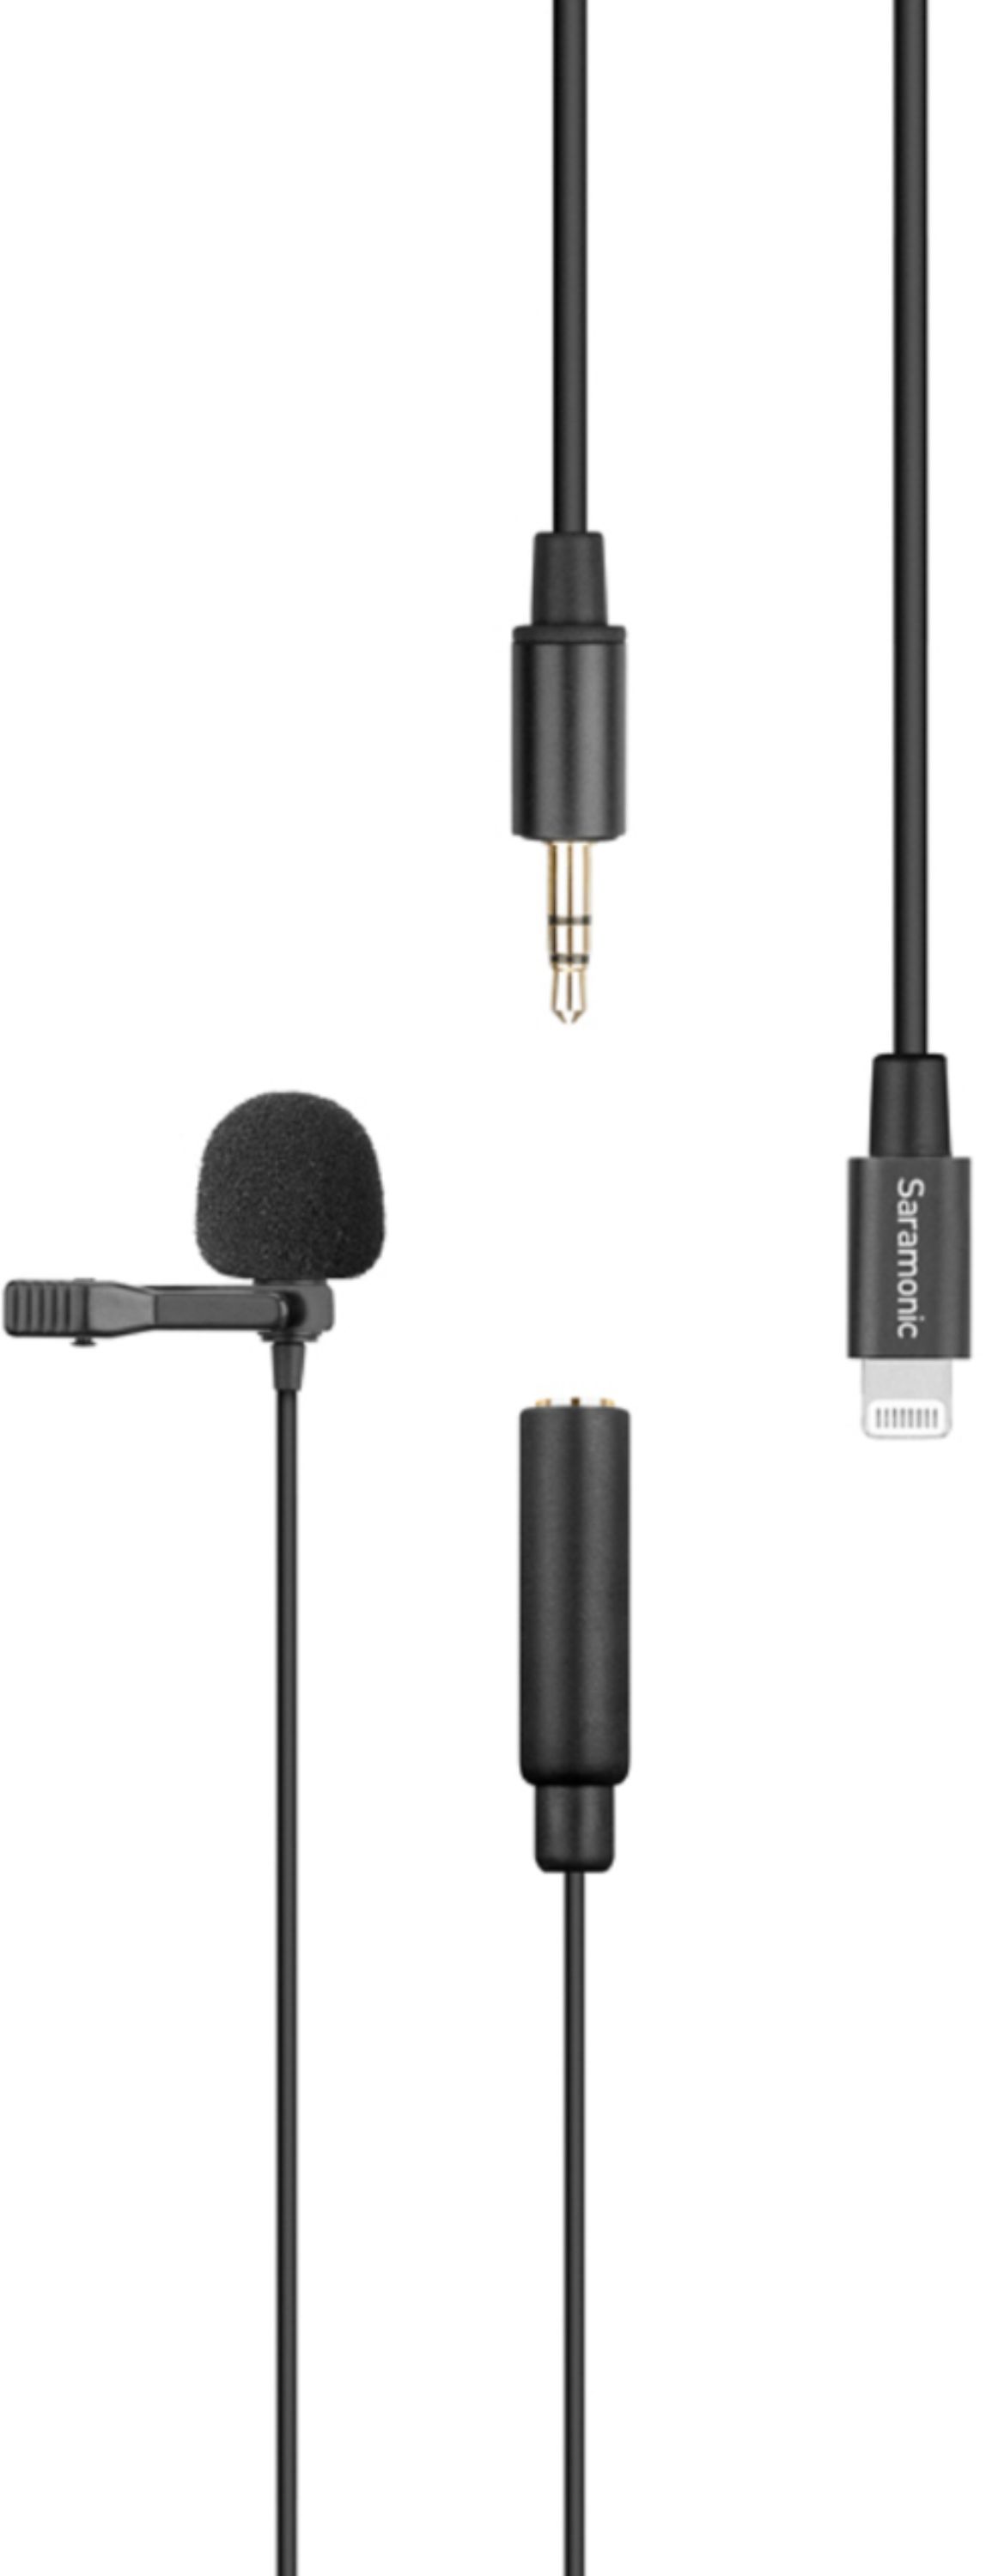 Microphones for iPhone, External Microphones for iPhone